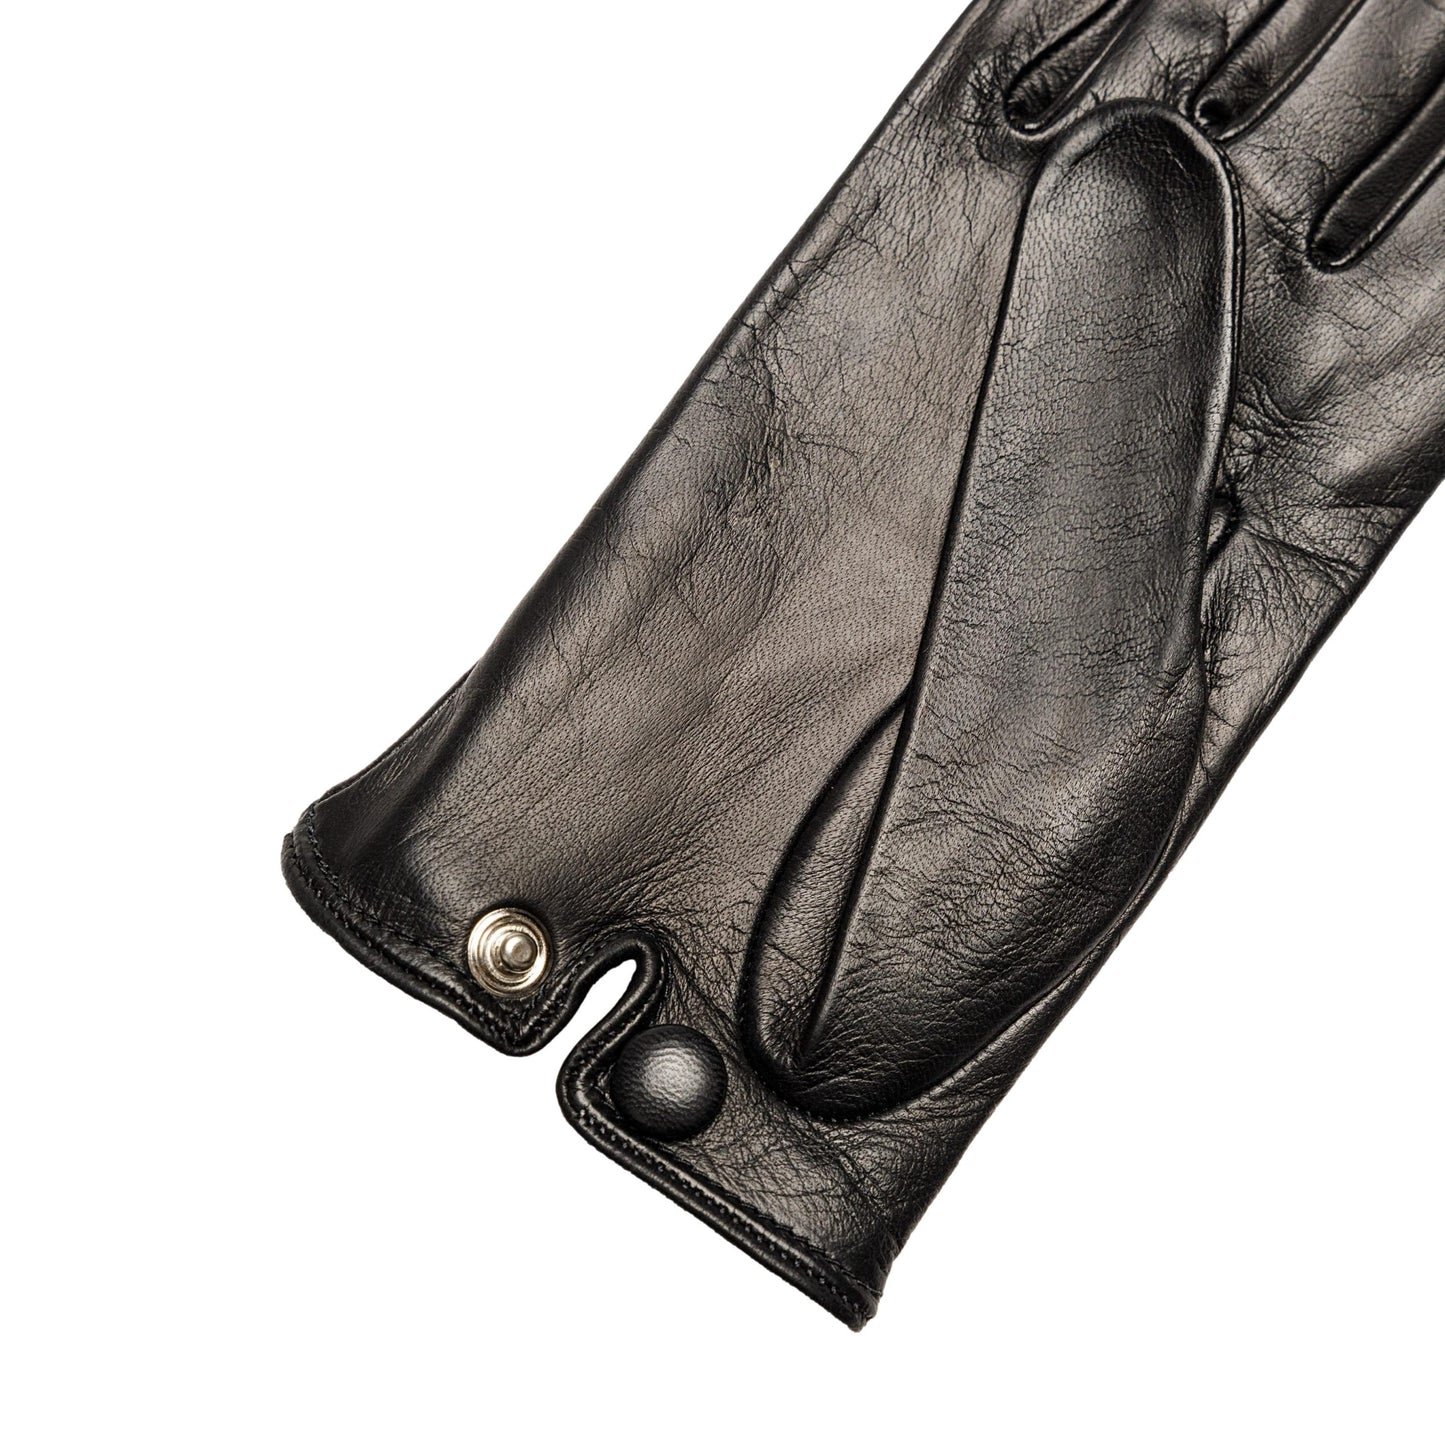 Women's black nappa leather driving gloves with points on fingers and unlined